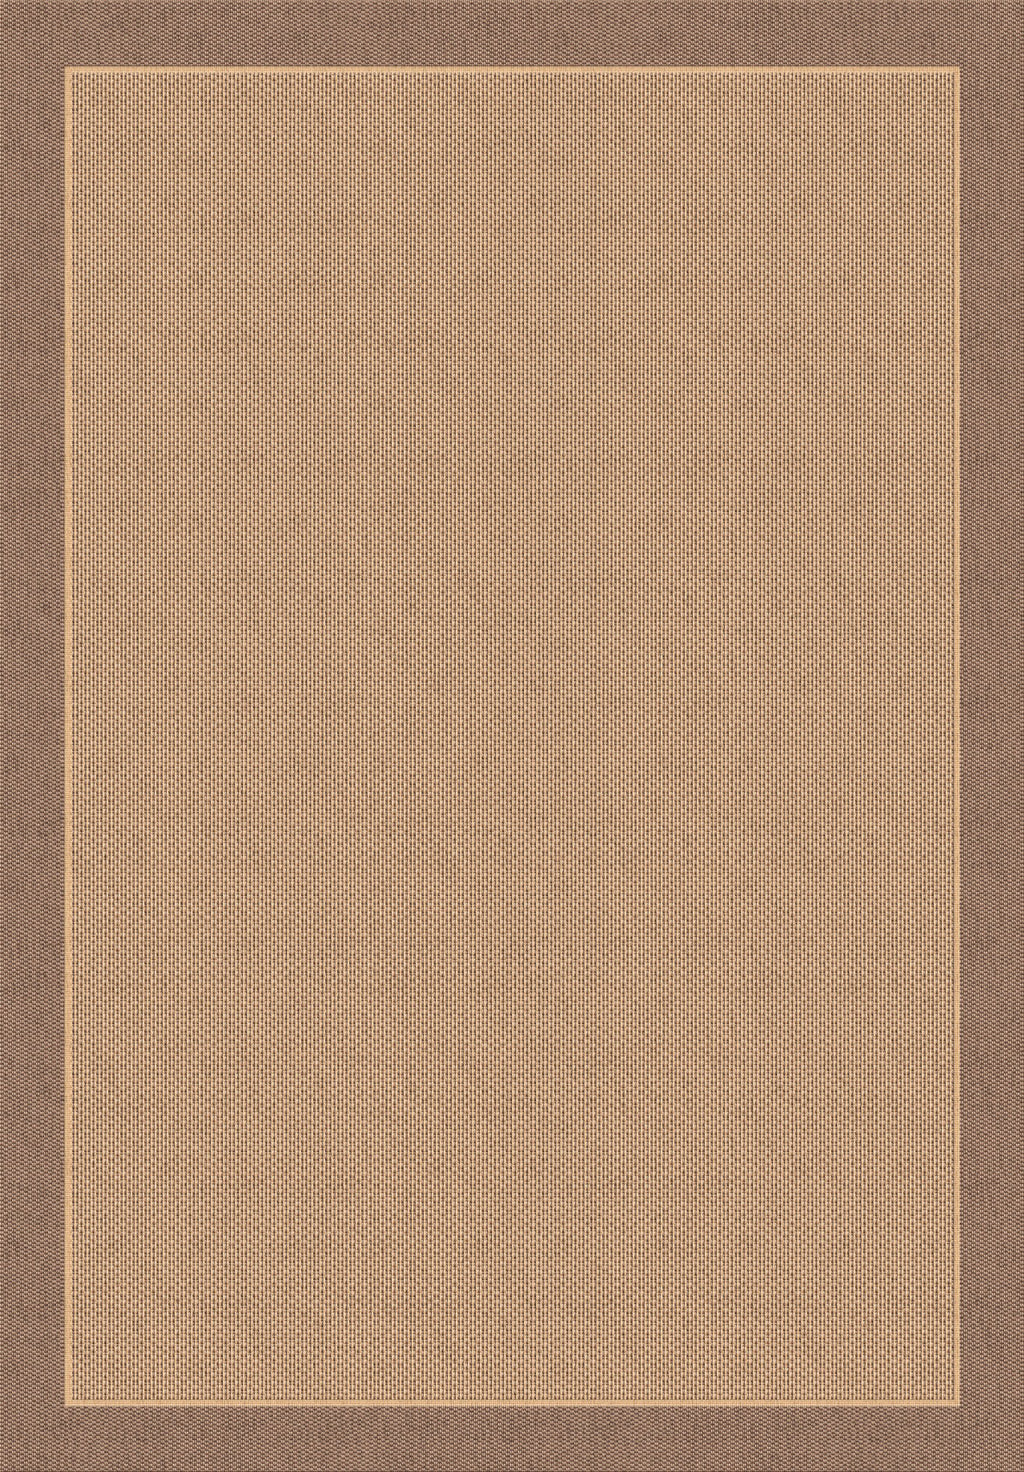 Dynamic Rugs Piazza 2746 Brown Area Rug main image